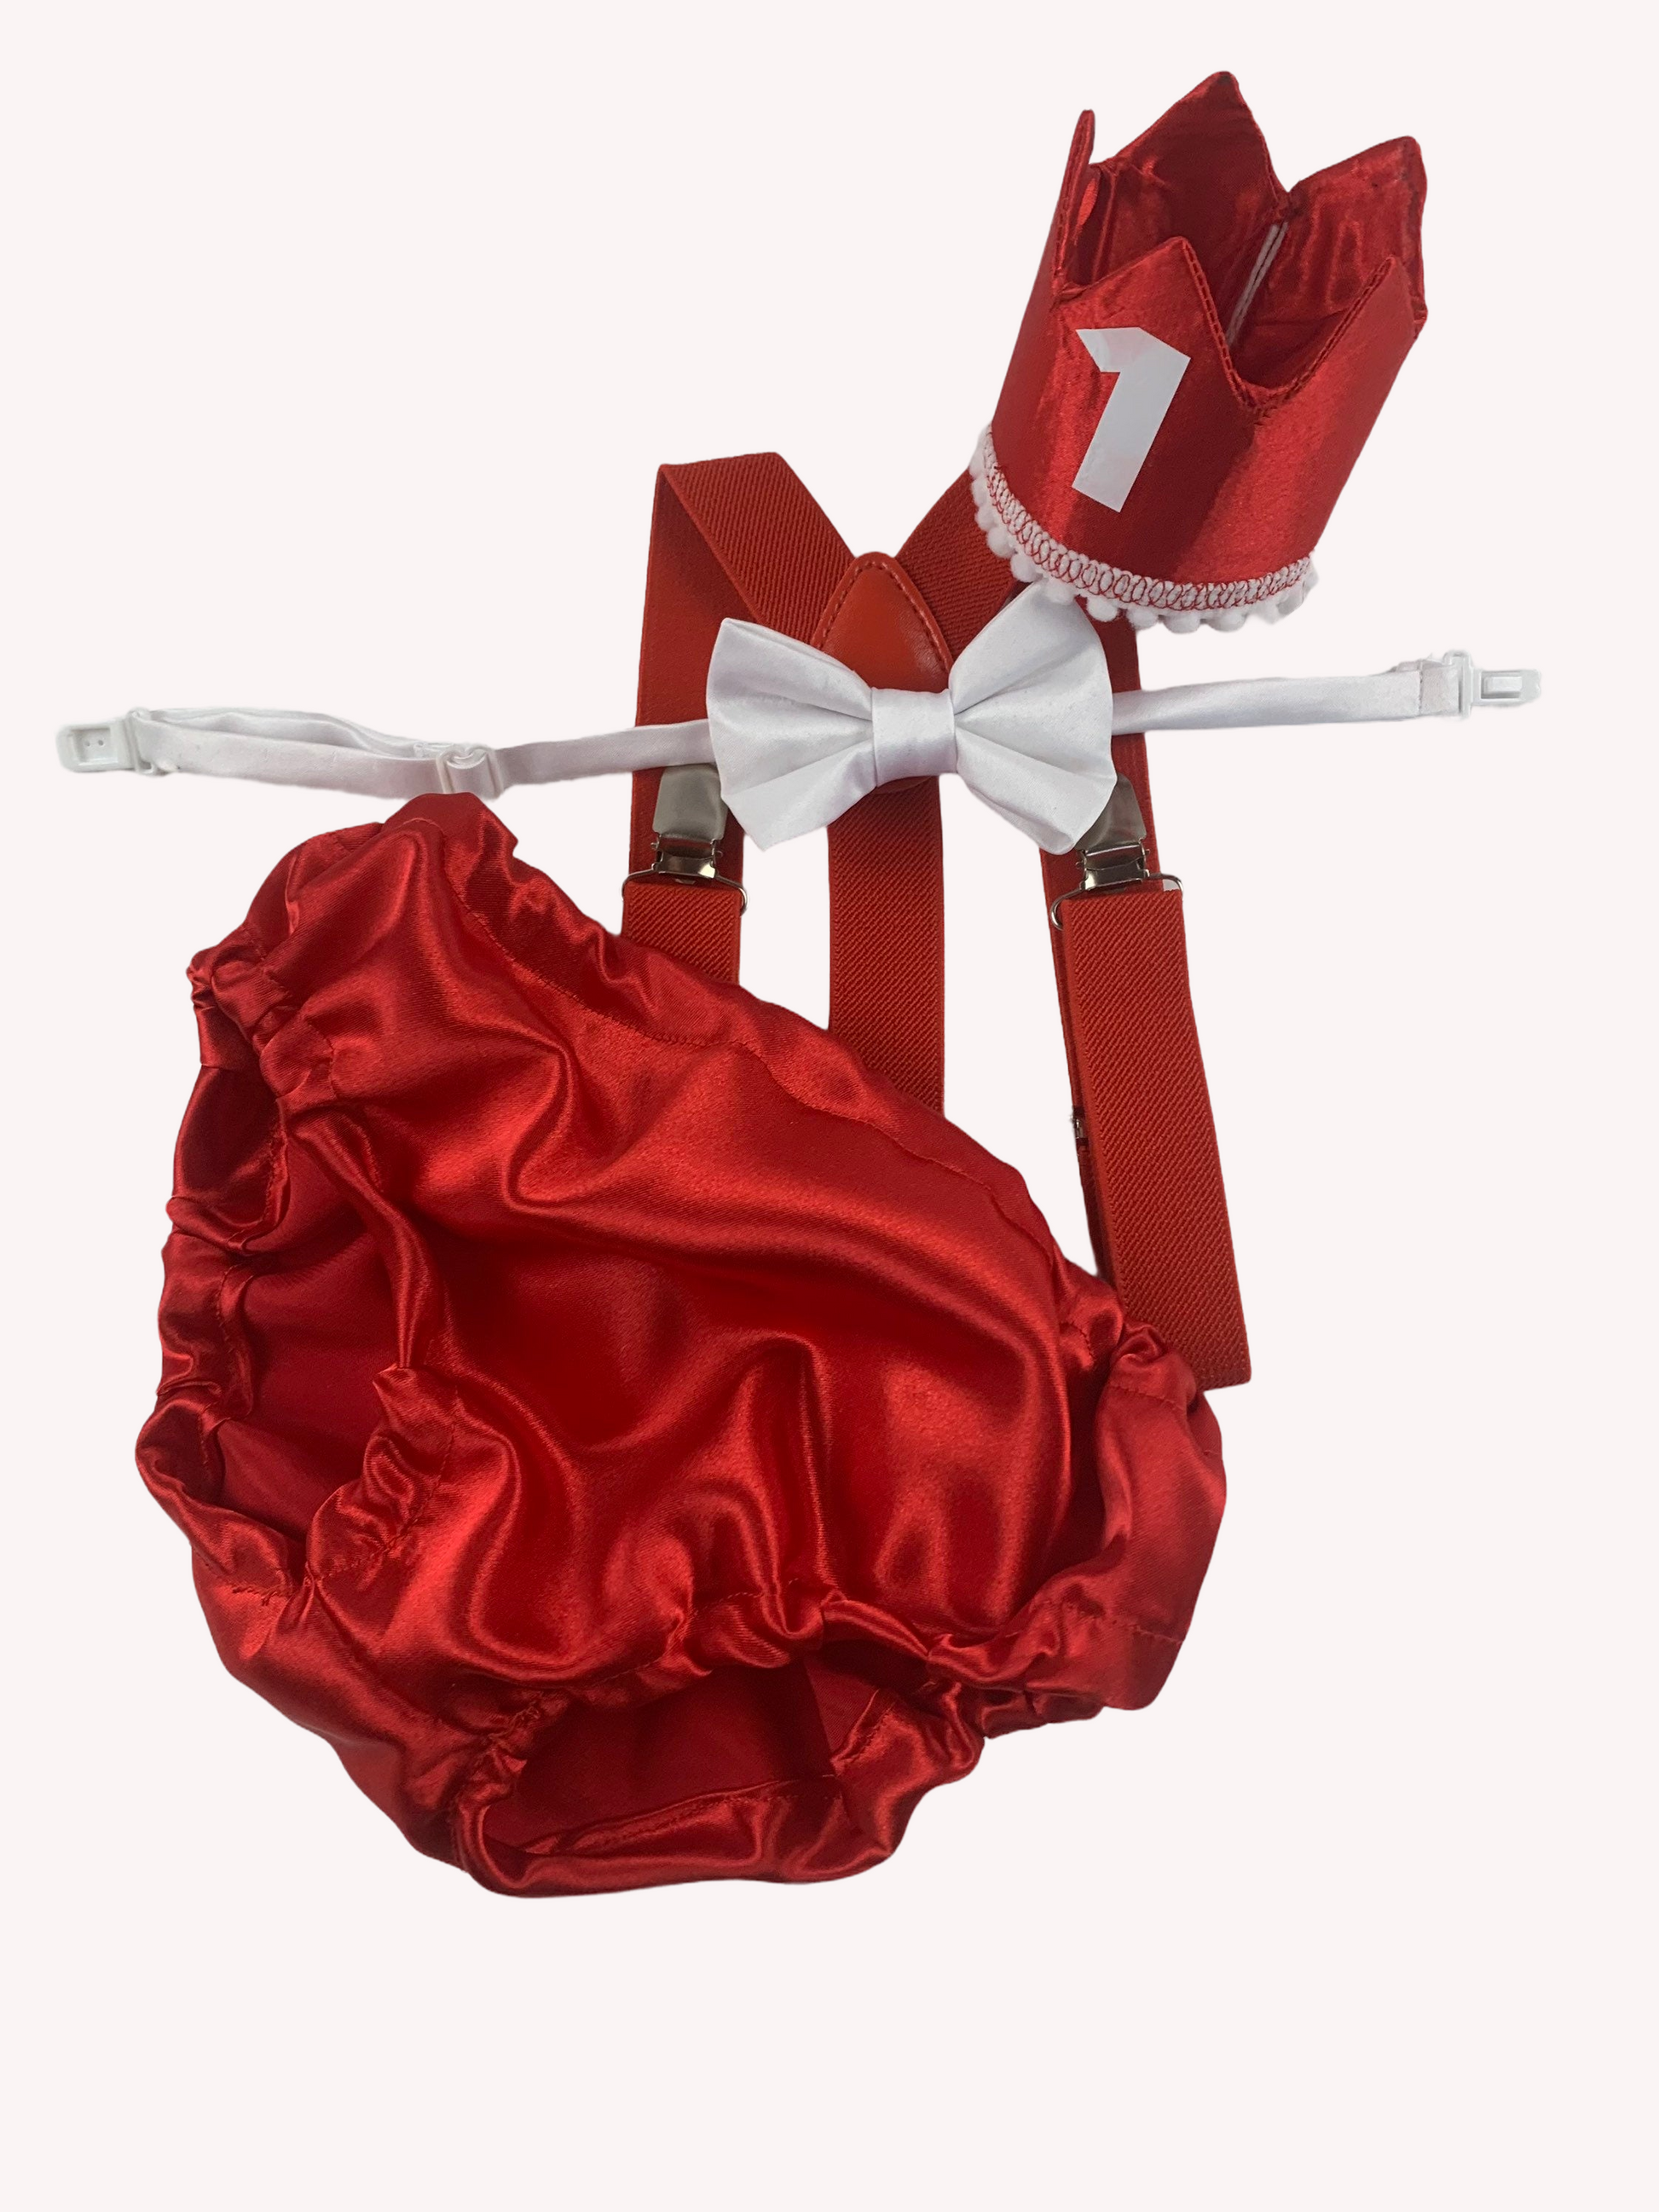 a red satin diaper with a white bow on it